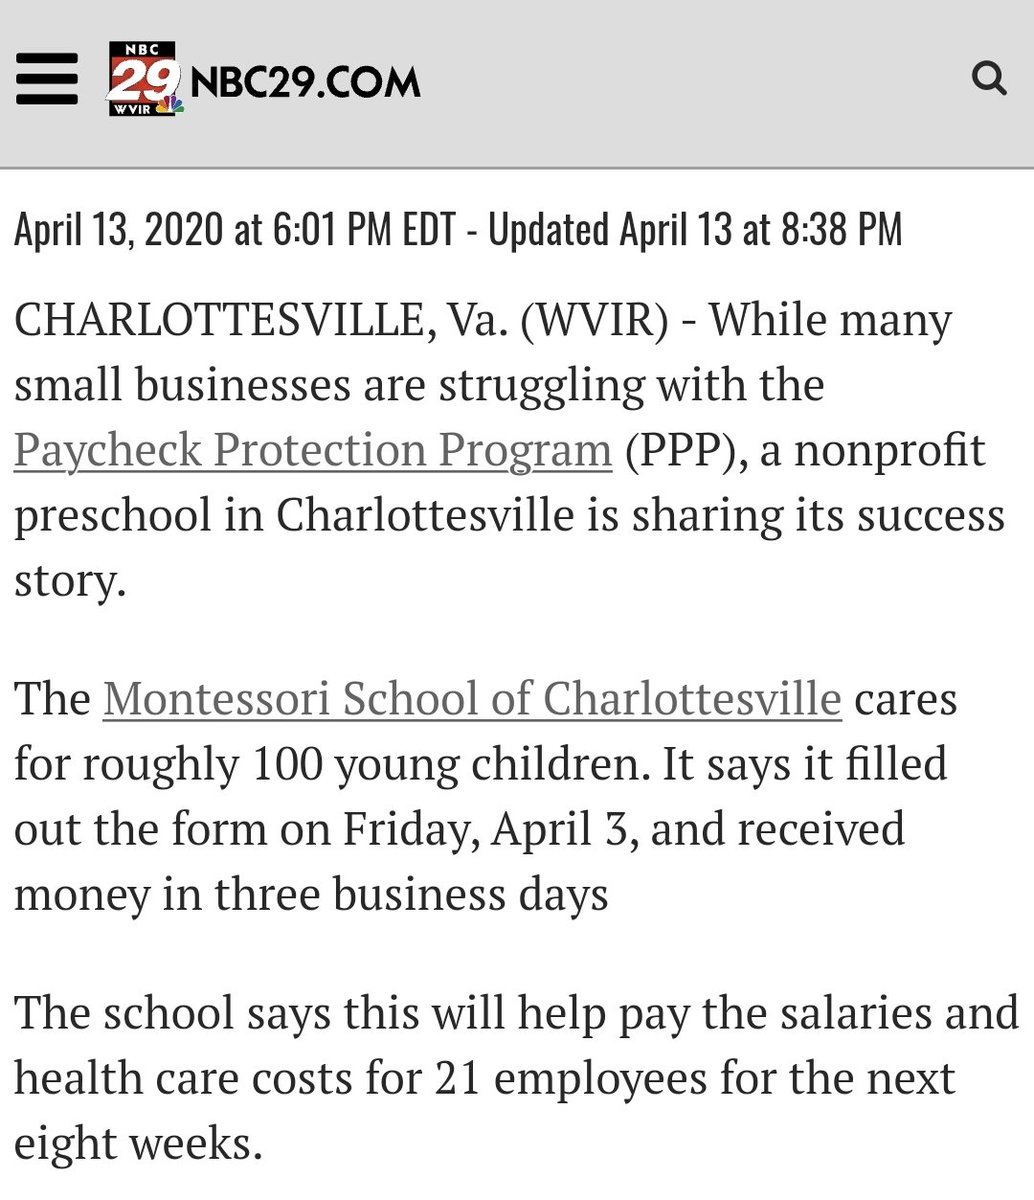 This is who Nancy Pelosi has cut off while she stocks up on artisanal ice cream in her $24,000 fridge https://www.nbc29.com/2020/04/13/charlottesville-nonprofit-school-successfully-receives-ppp-funds/